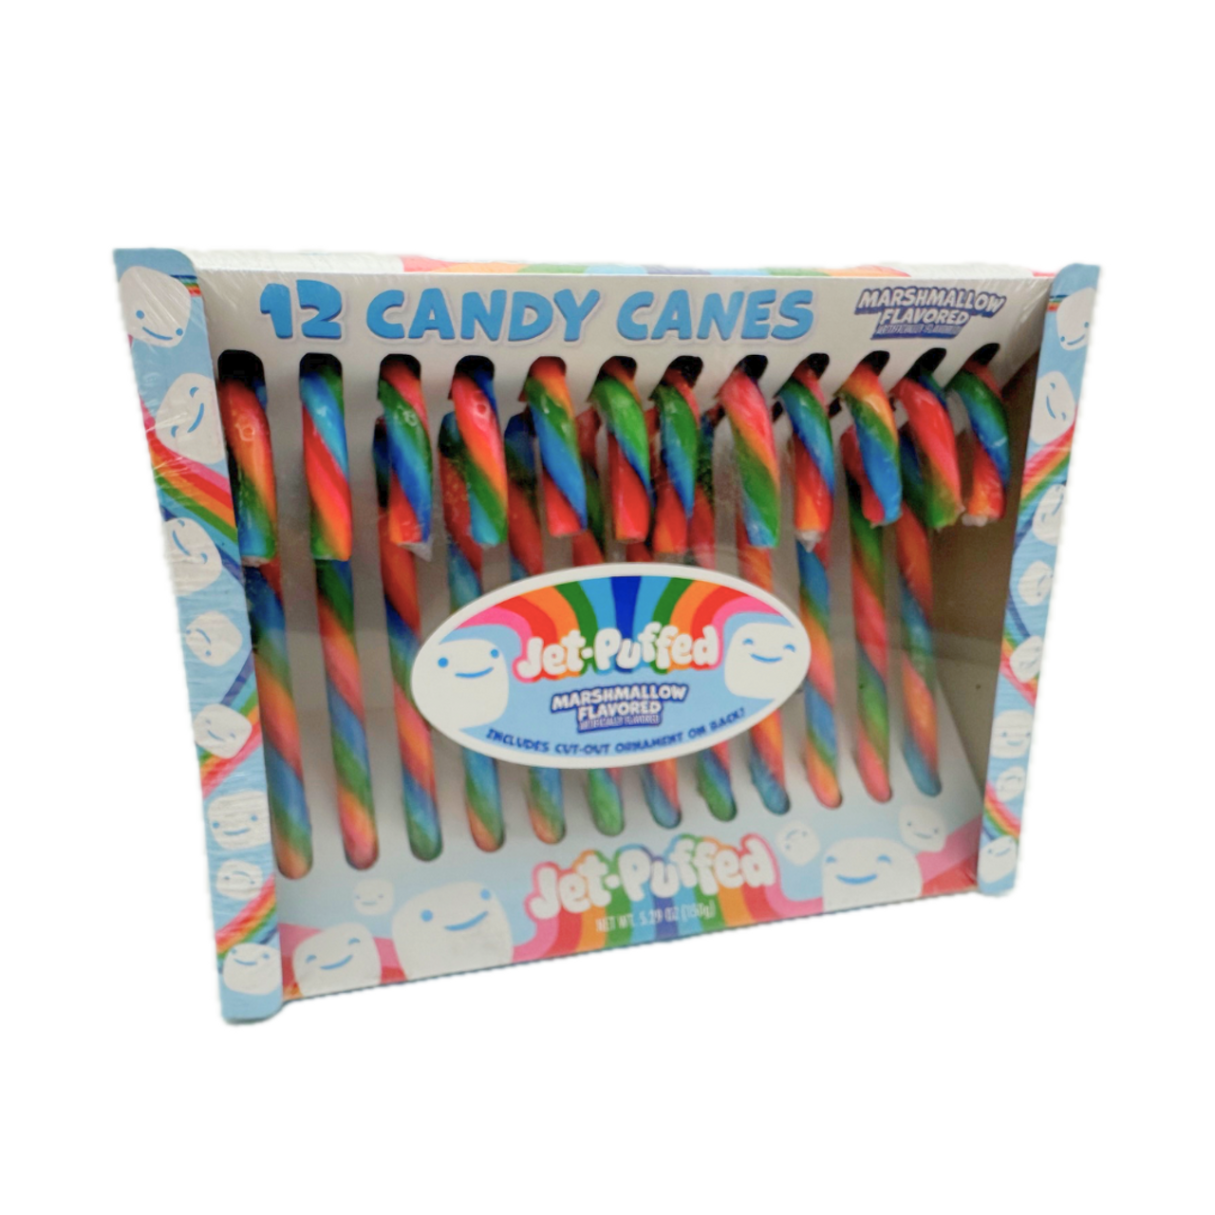 Jet-Puffed Marhsmallow Flavored Candy Canes - 12ct